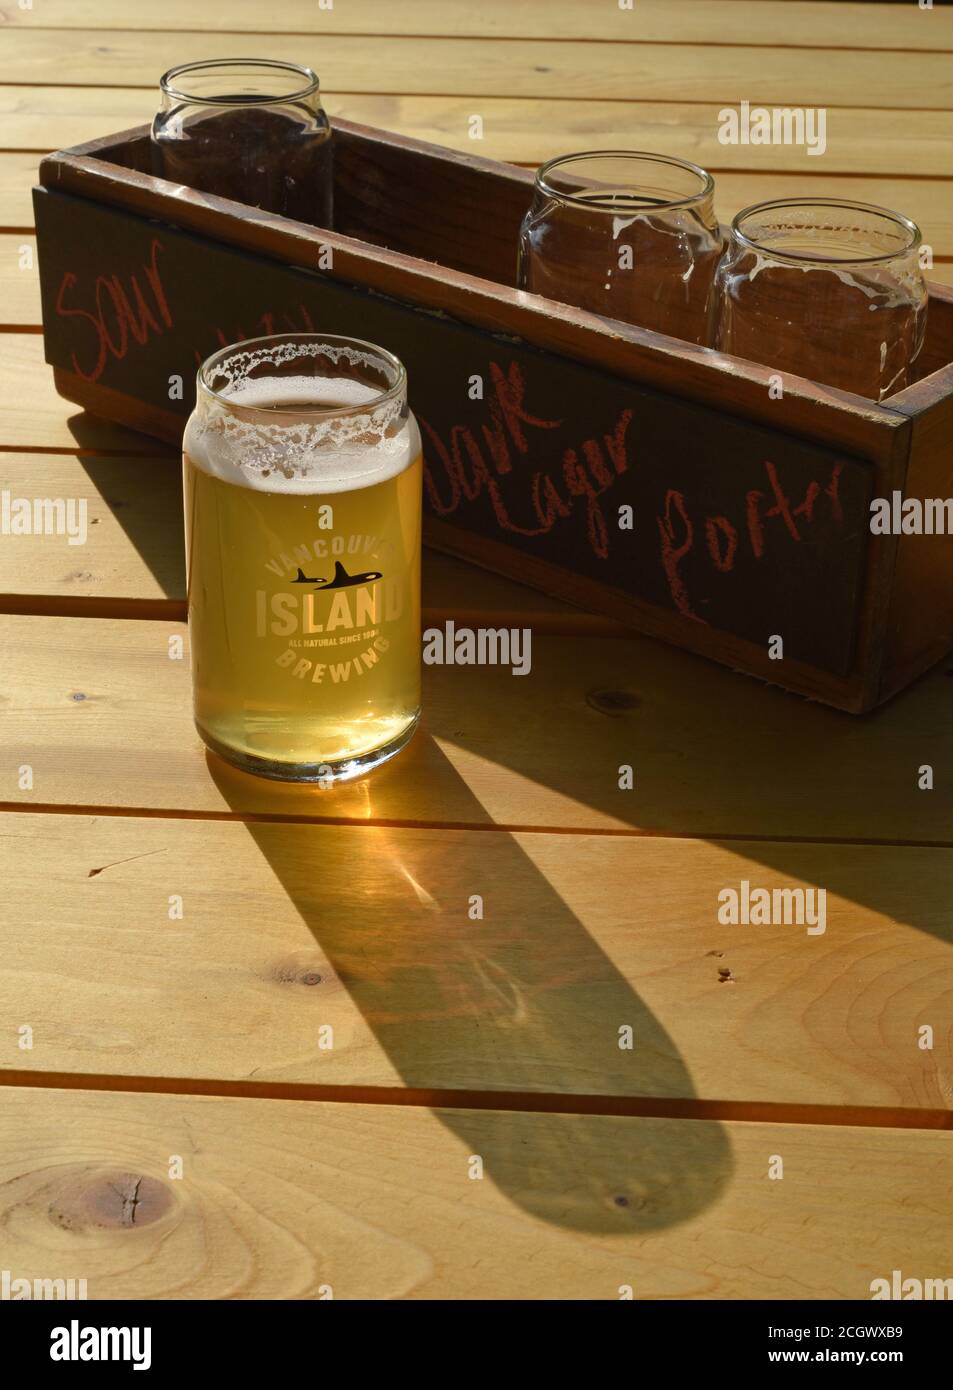 A taster sized glass of craft beer from a beer flight from the brewer Vancouver Island Brewing at the brewery’s tasting room in Victoria, British Colu Stock Photo